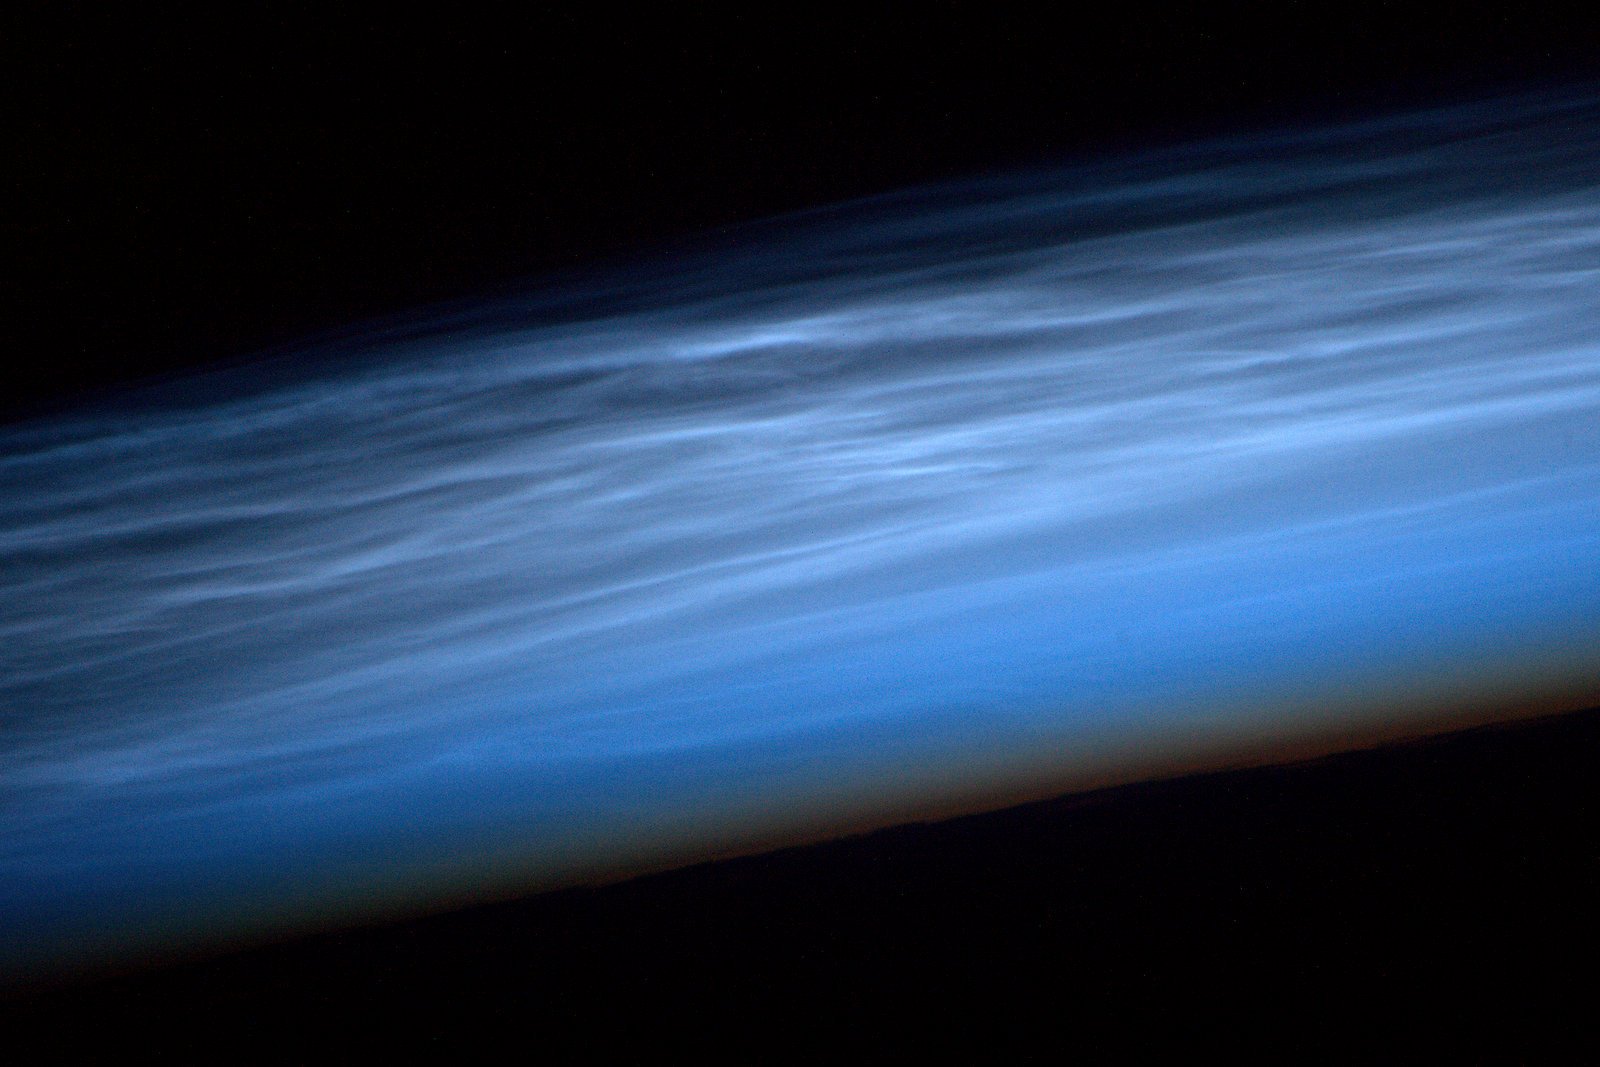 Noctilucent clouds, formed by ice crystals, high up in Earth's mesosphere.